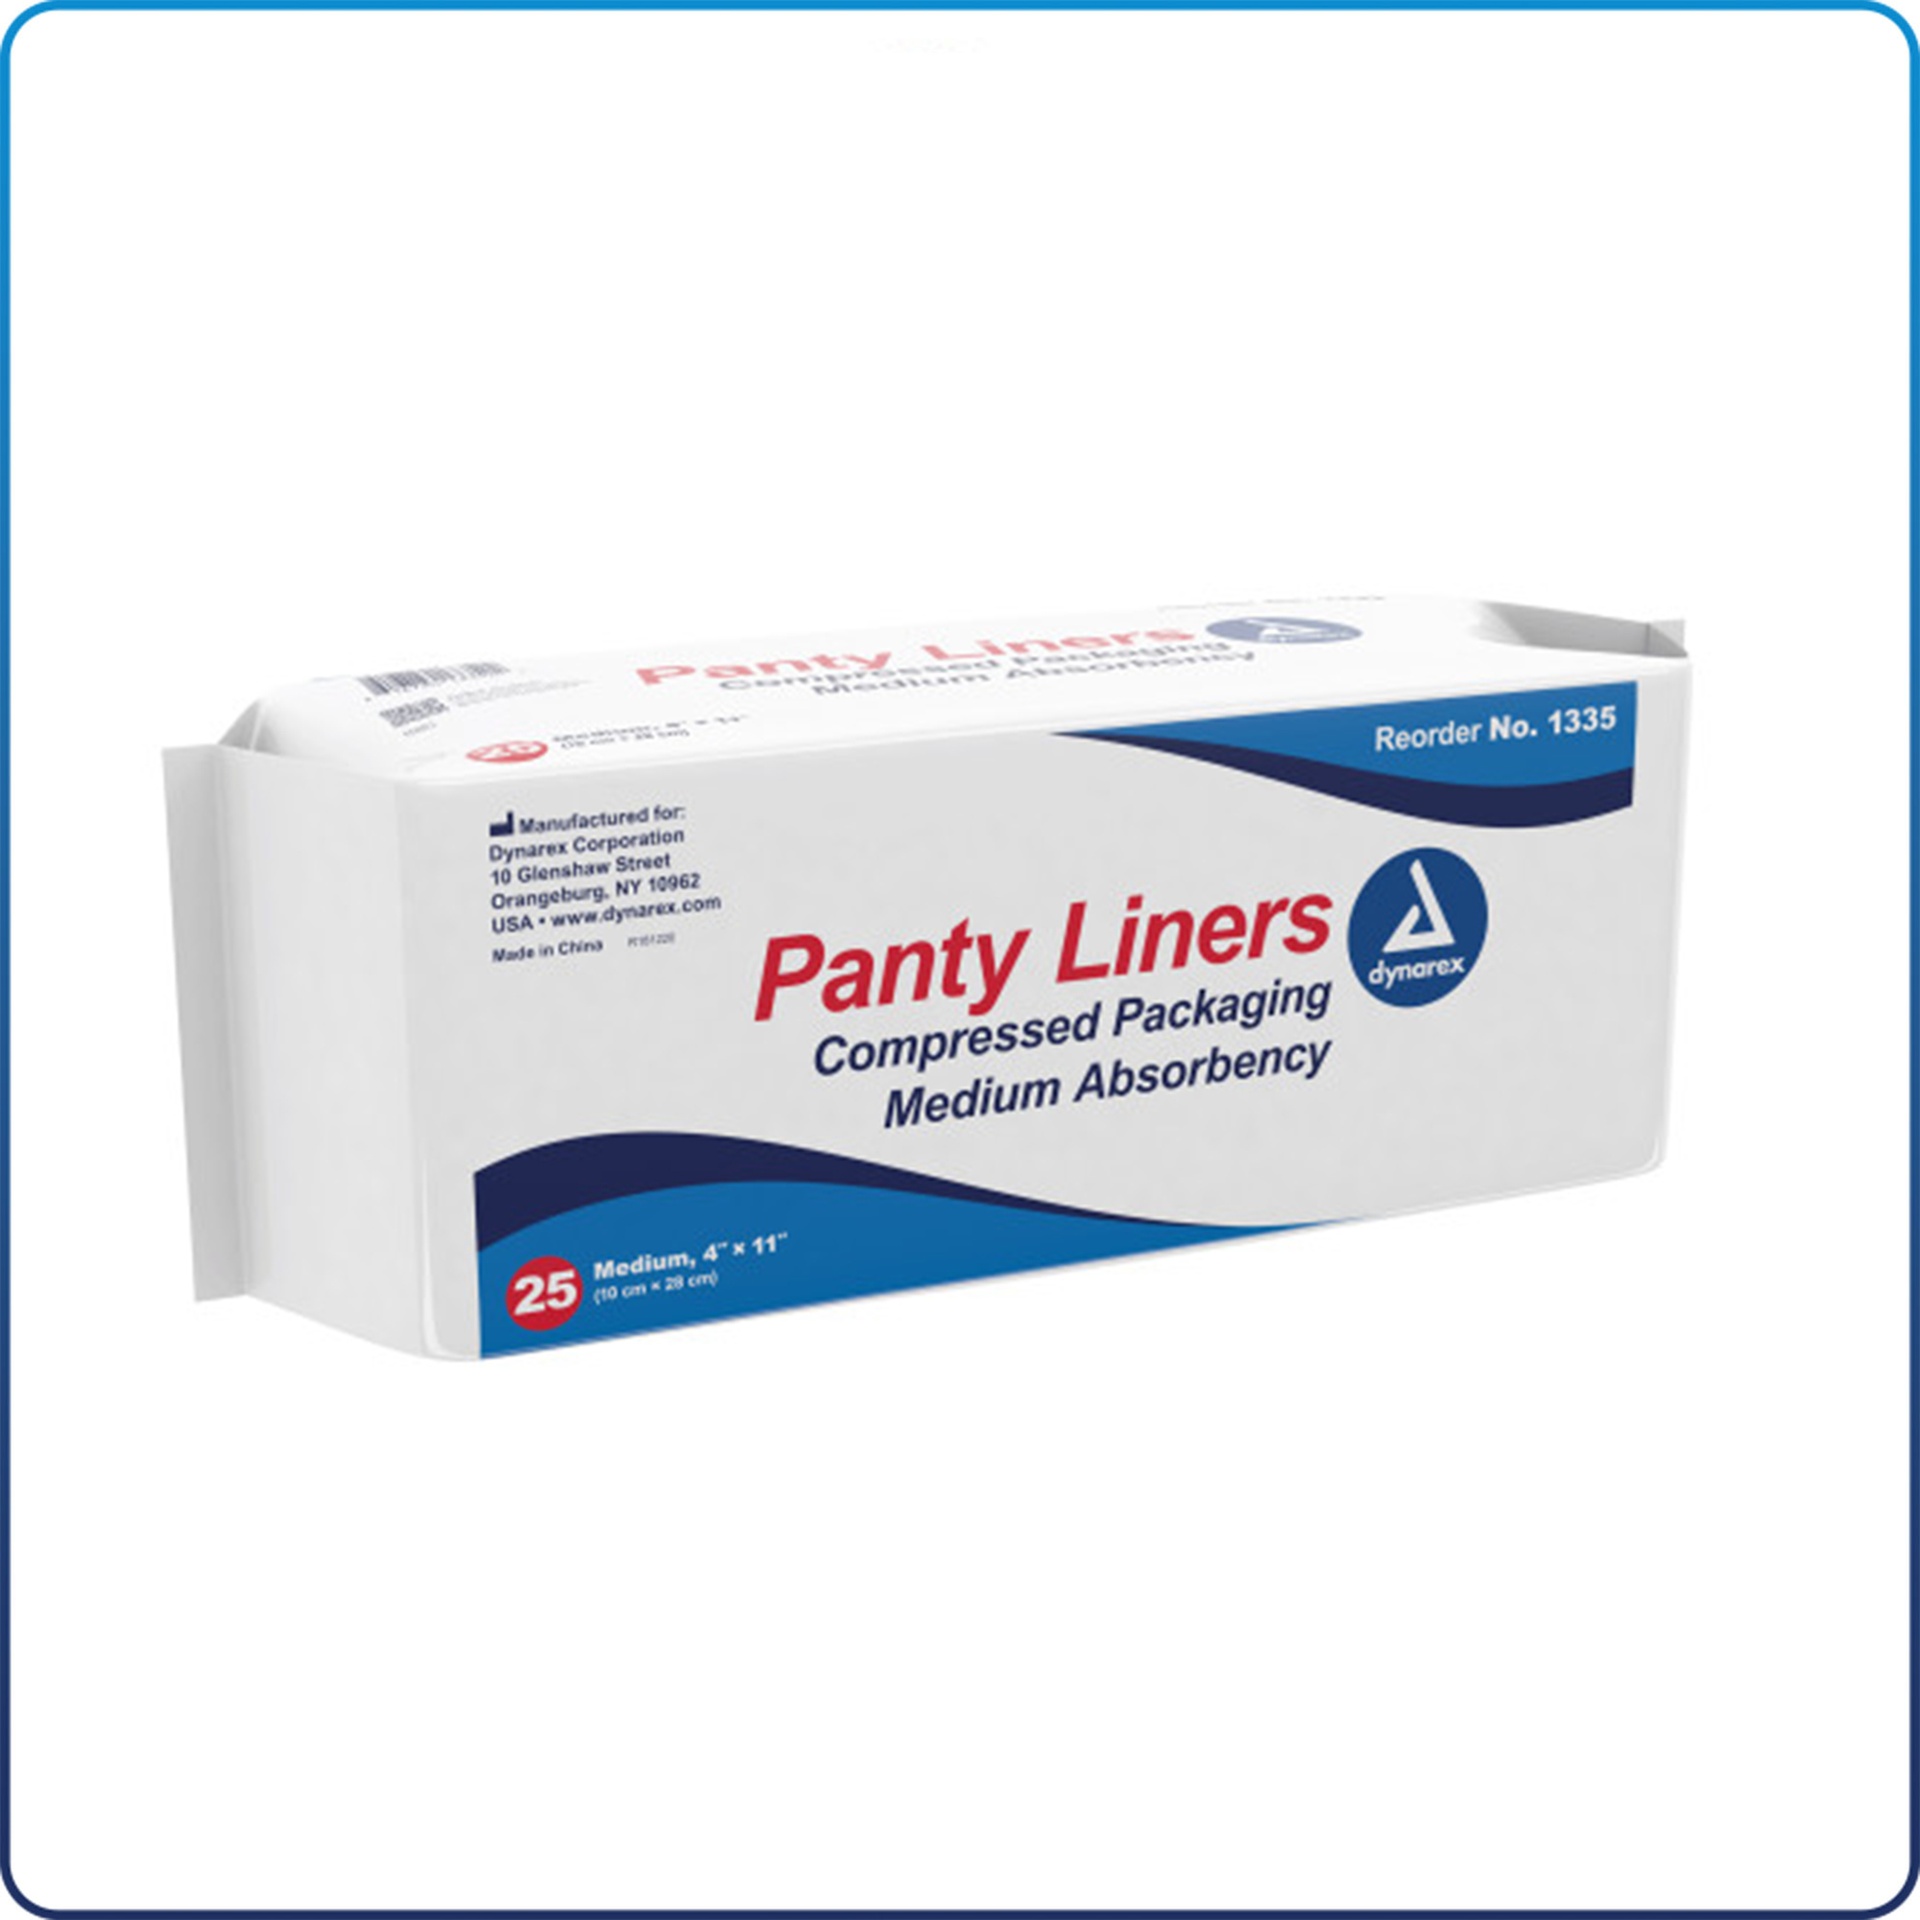 Panty Liners